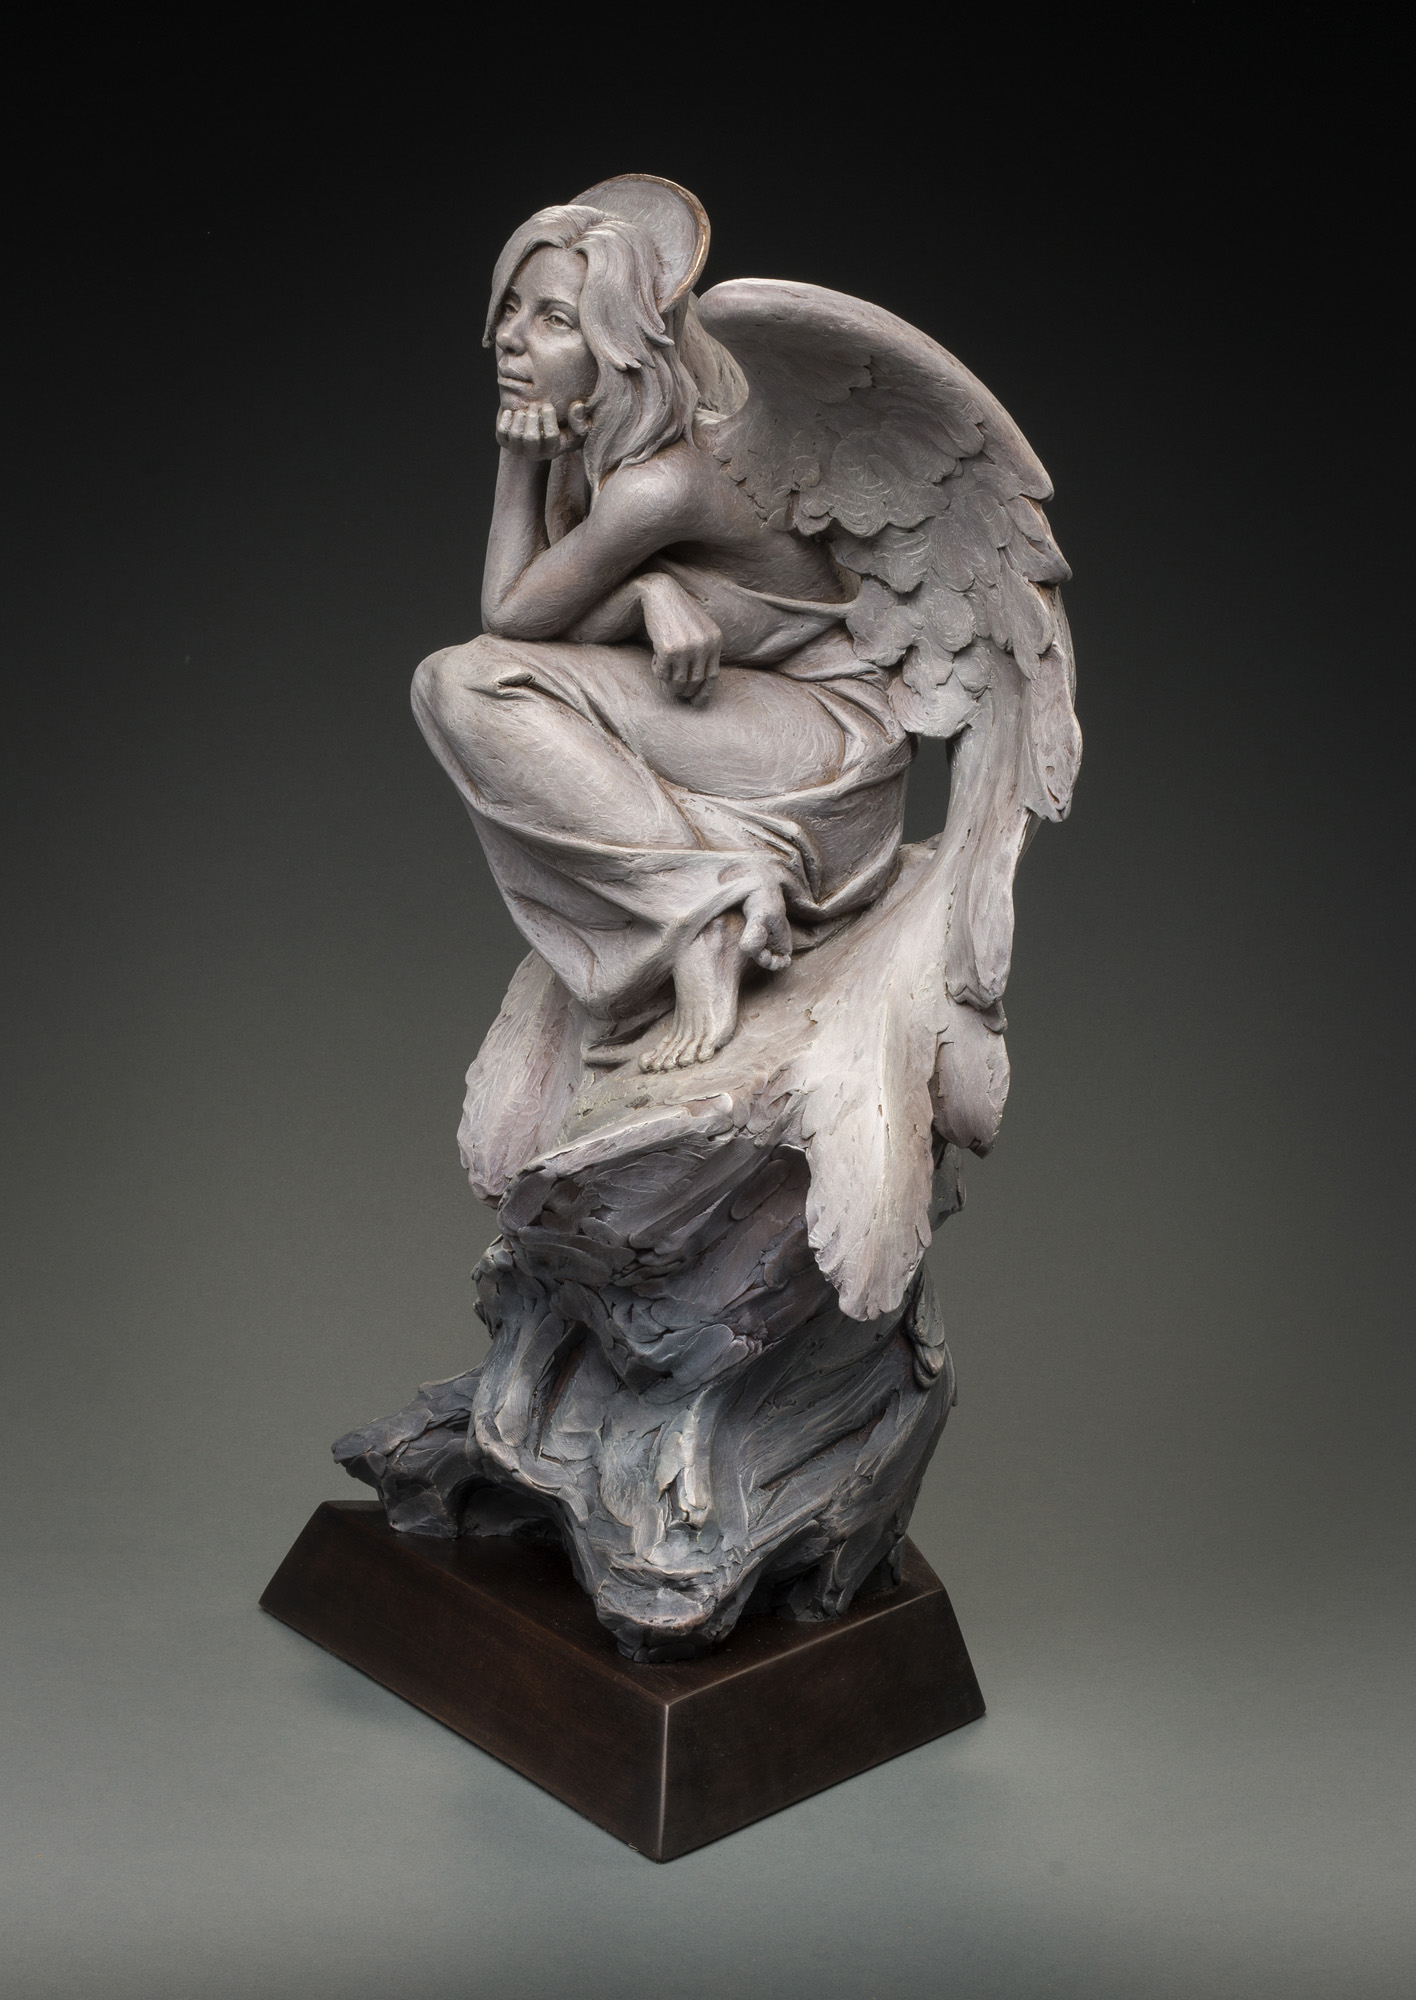 An Angel in Contemplation – SIDE VIEW 2